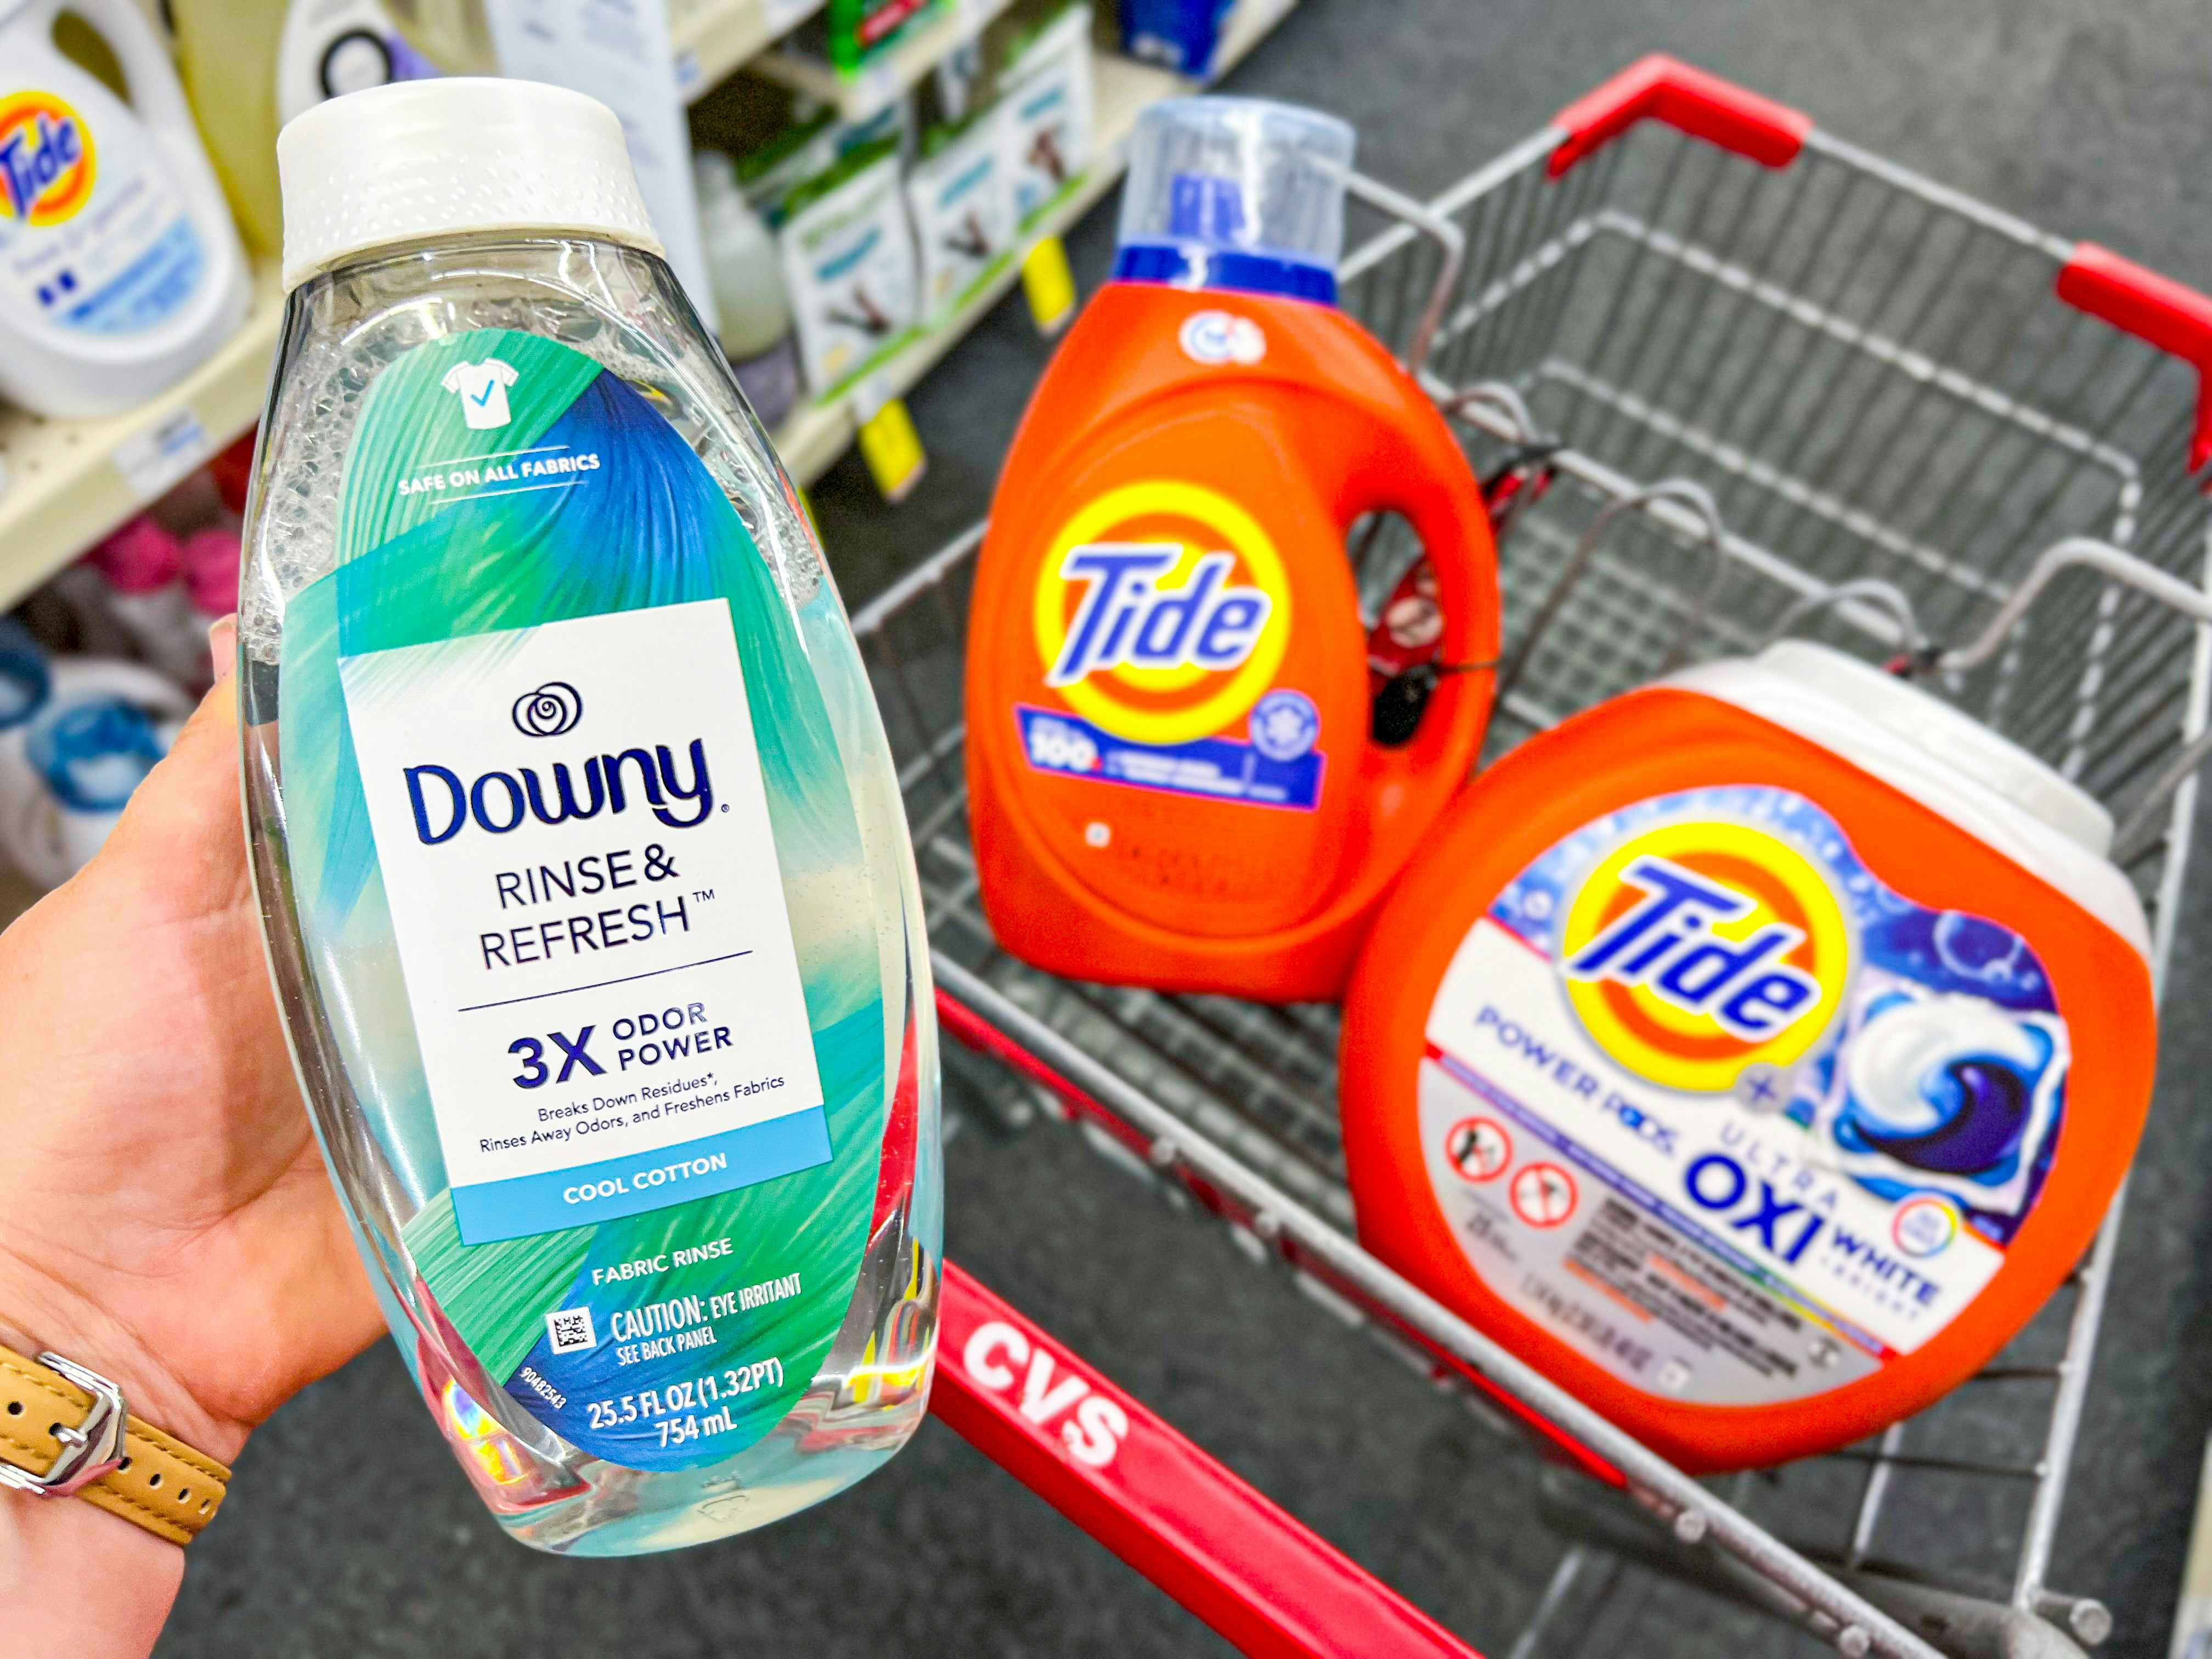 Downy Rinse & Refresh and Large Bottles of Tide, Only $4.33 Each at CVS